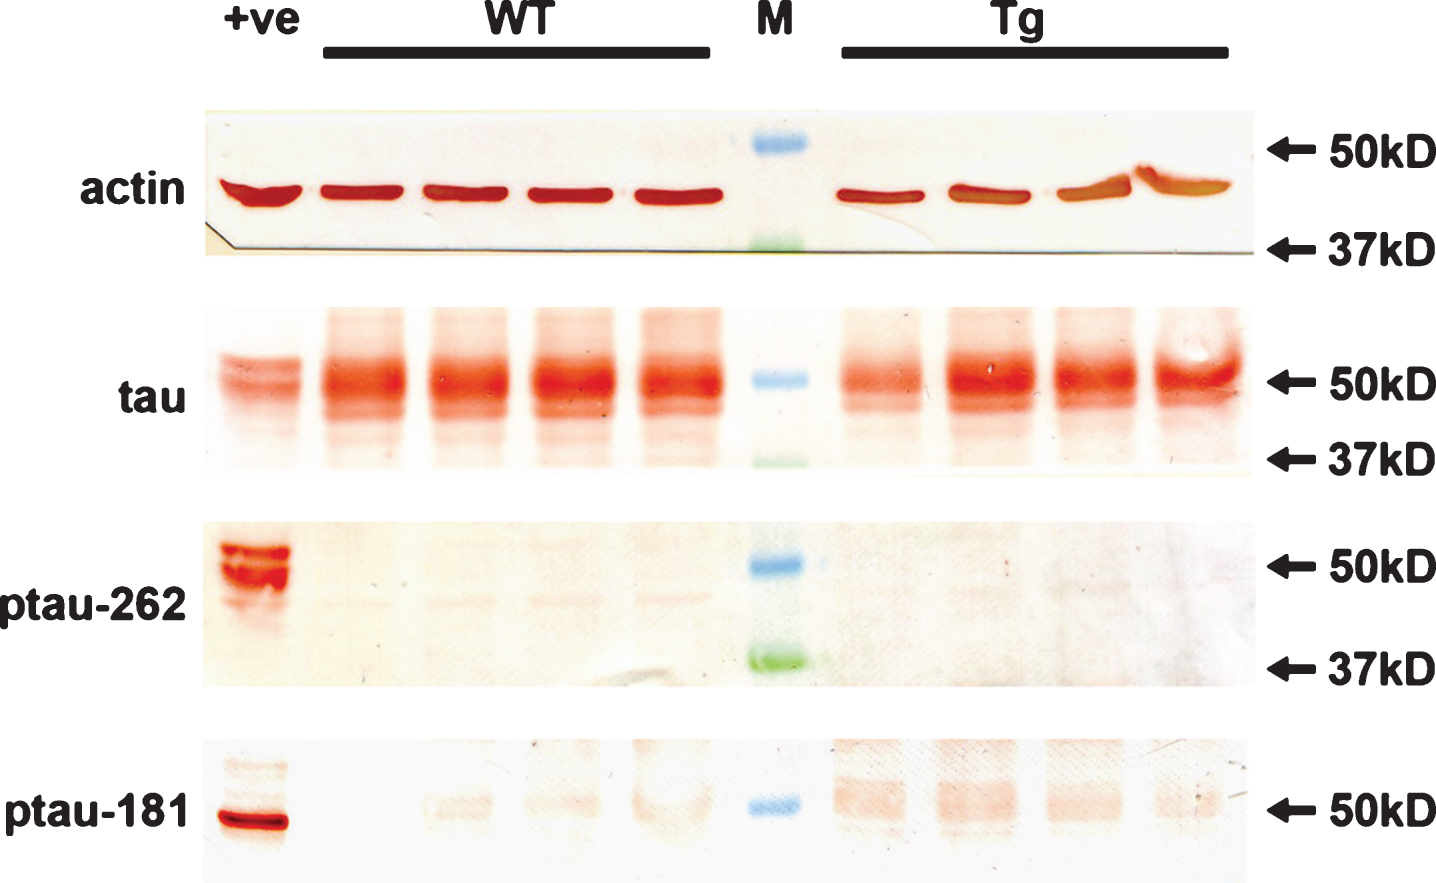 Analysis of hyperphosphorylated tau in WT and Tg retinas. Expression of tau, p-tau-T181, and p-tau-S262 proteins in 12-month-old WT and Tg retinas, as evaluated by western immunoblotting. Representative blots are shown from 12-month-old animals. Tau is abundant in extracts from WT and Tg retinas. In contrast, no unambiguous bands of the correct molecular weight are evident when membranes are incubated with antibodies directed against p-tau-T181 and p-tau-S262. Intense, single bands of the expected molecular weights are, however, apparent in an extract from a retinal culture treated with the potent phosphatase inhibitor calyculin A (+ve).